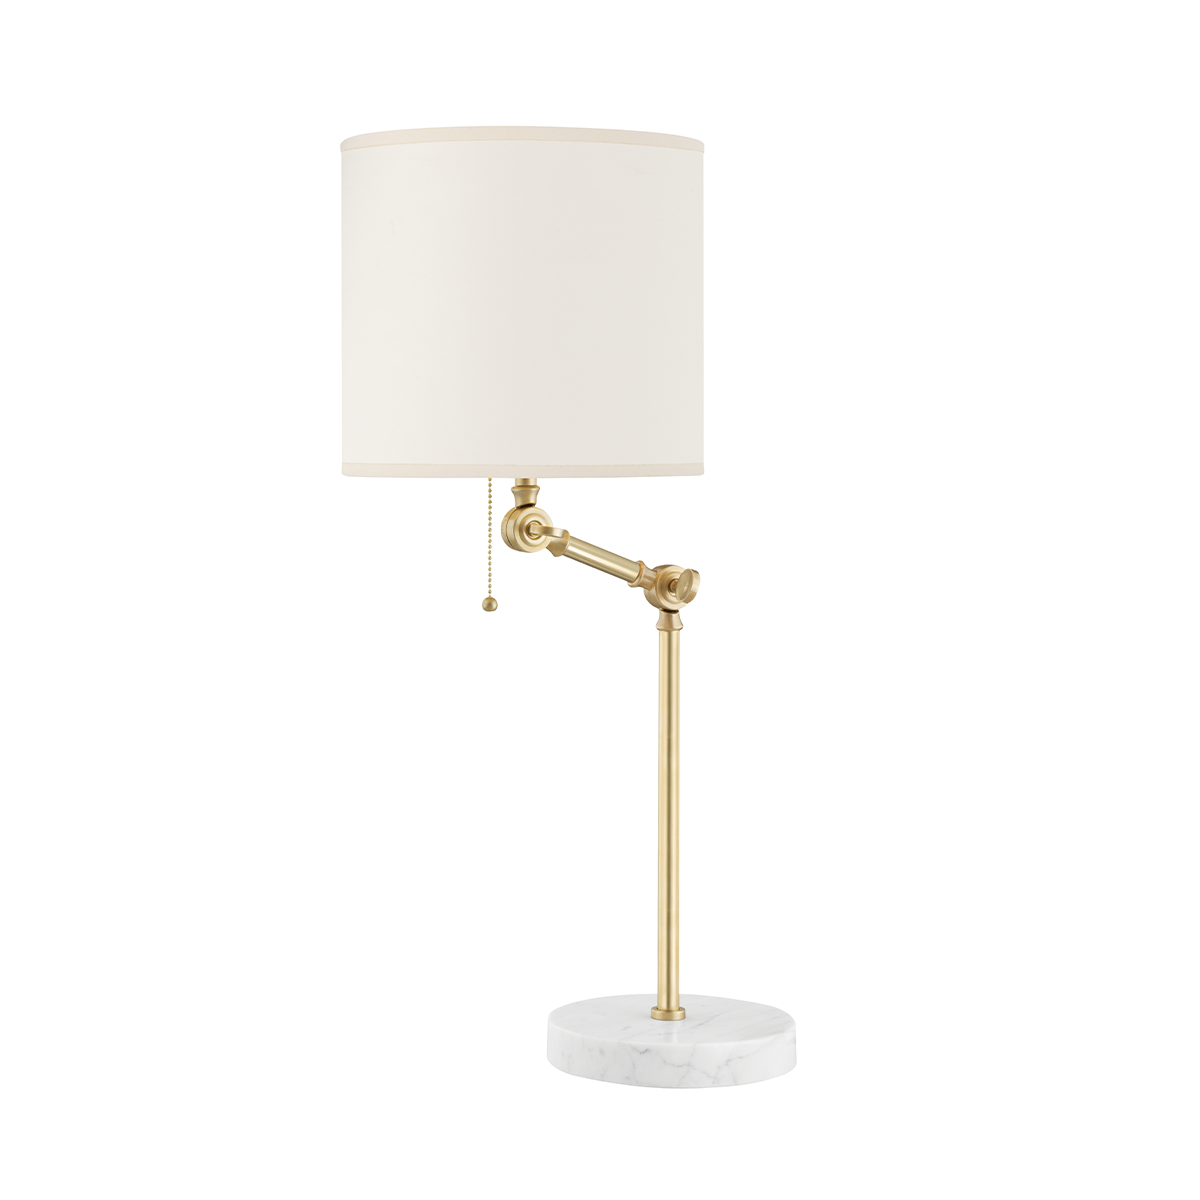 Essex Table Lamp - by Mark D. Sikes - Rug & Weave